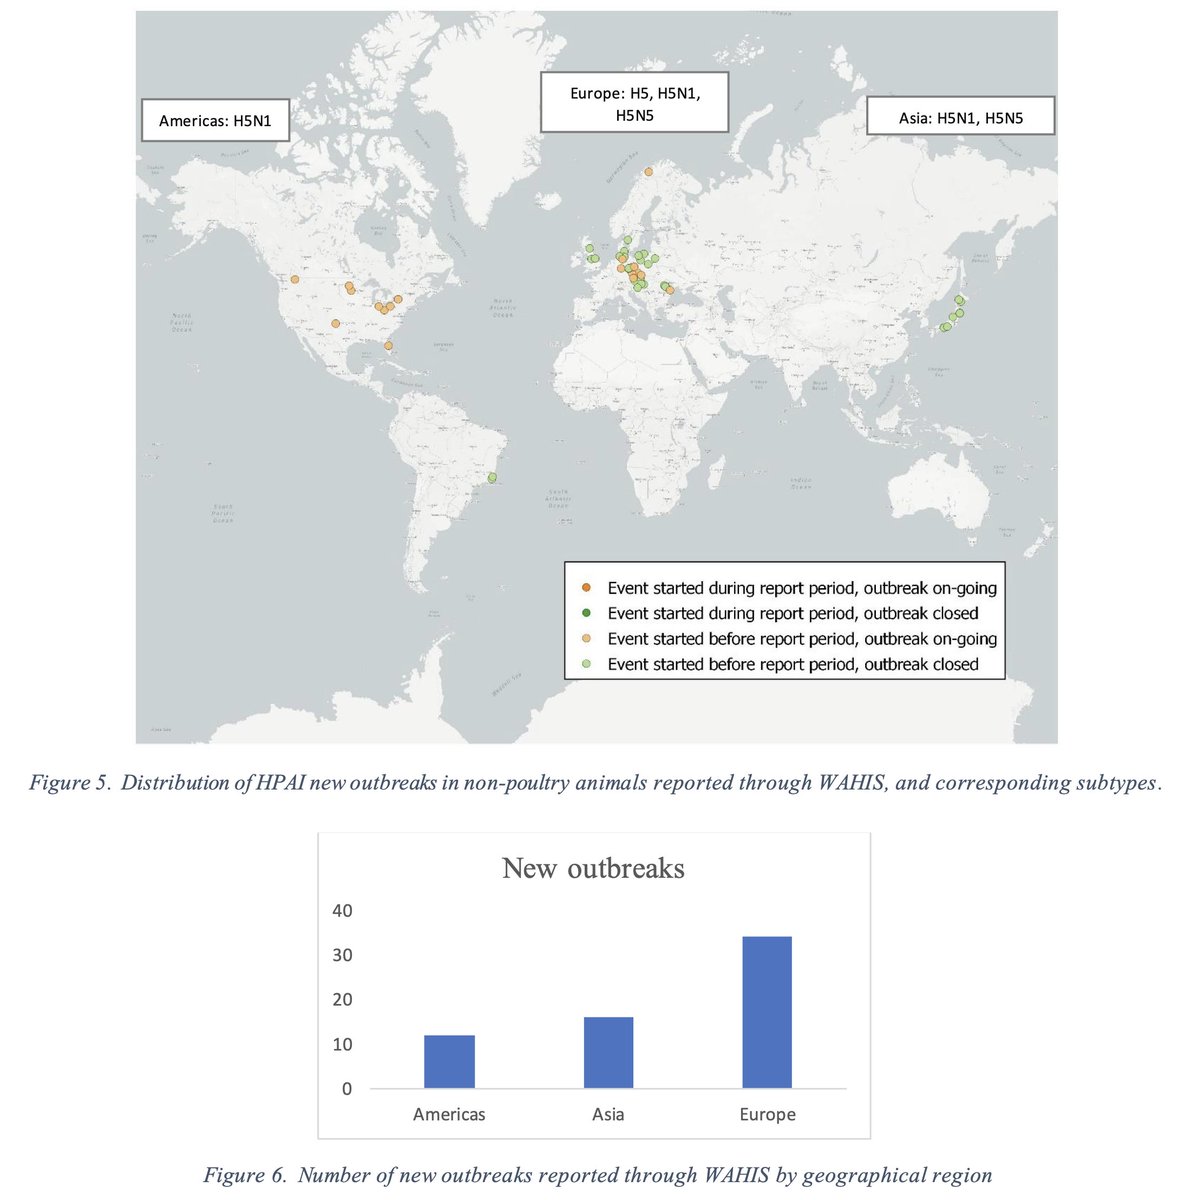 🦆 Latest @WOAH #HPAI Situation Report. #Influenza 🗓️ Covers 17 Feb-15 Mar 2024 📊 21 outbreaks reported in poultry & 62 in non-poultry birds + mammals over the 4 weeks ▶️ About 405,000 poultry birds died/culled in 4 week period, mostly in Europe 🔗: woah.org/app/uploads/20…